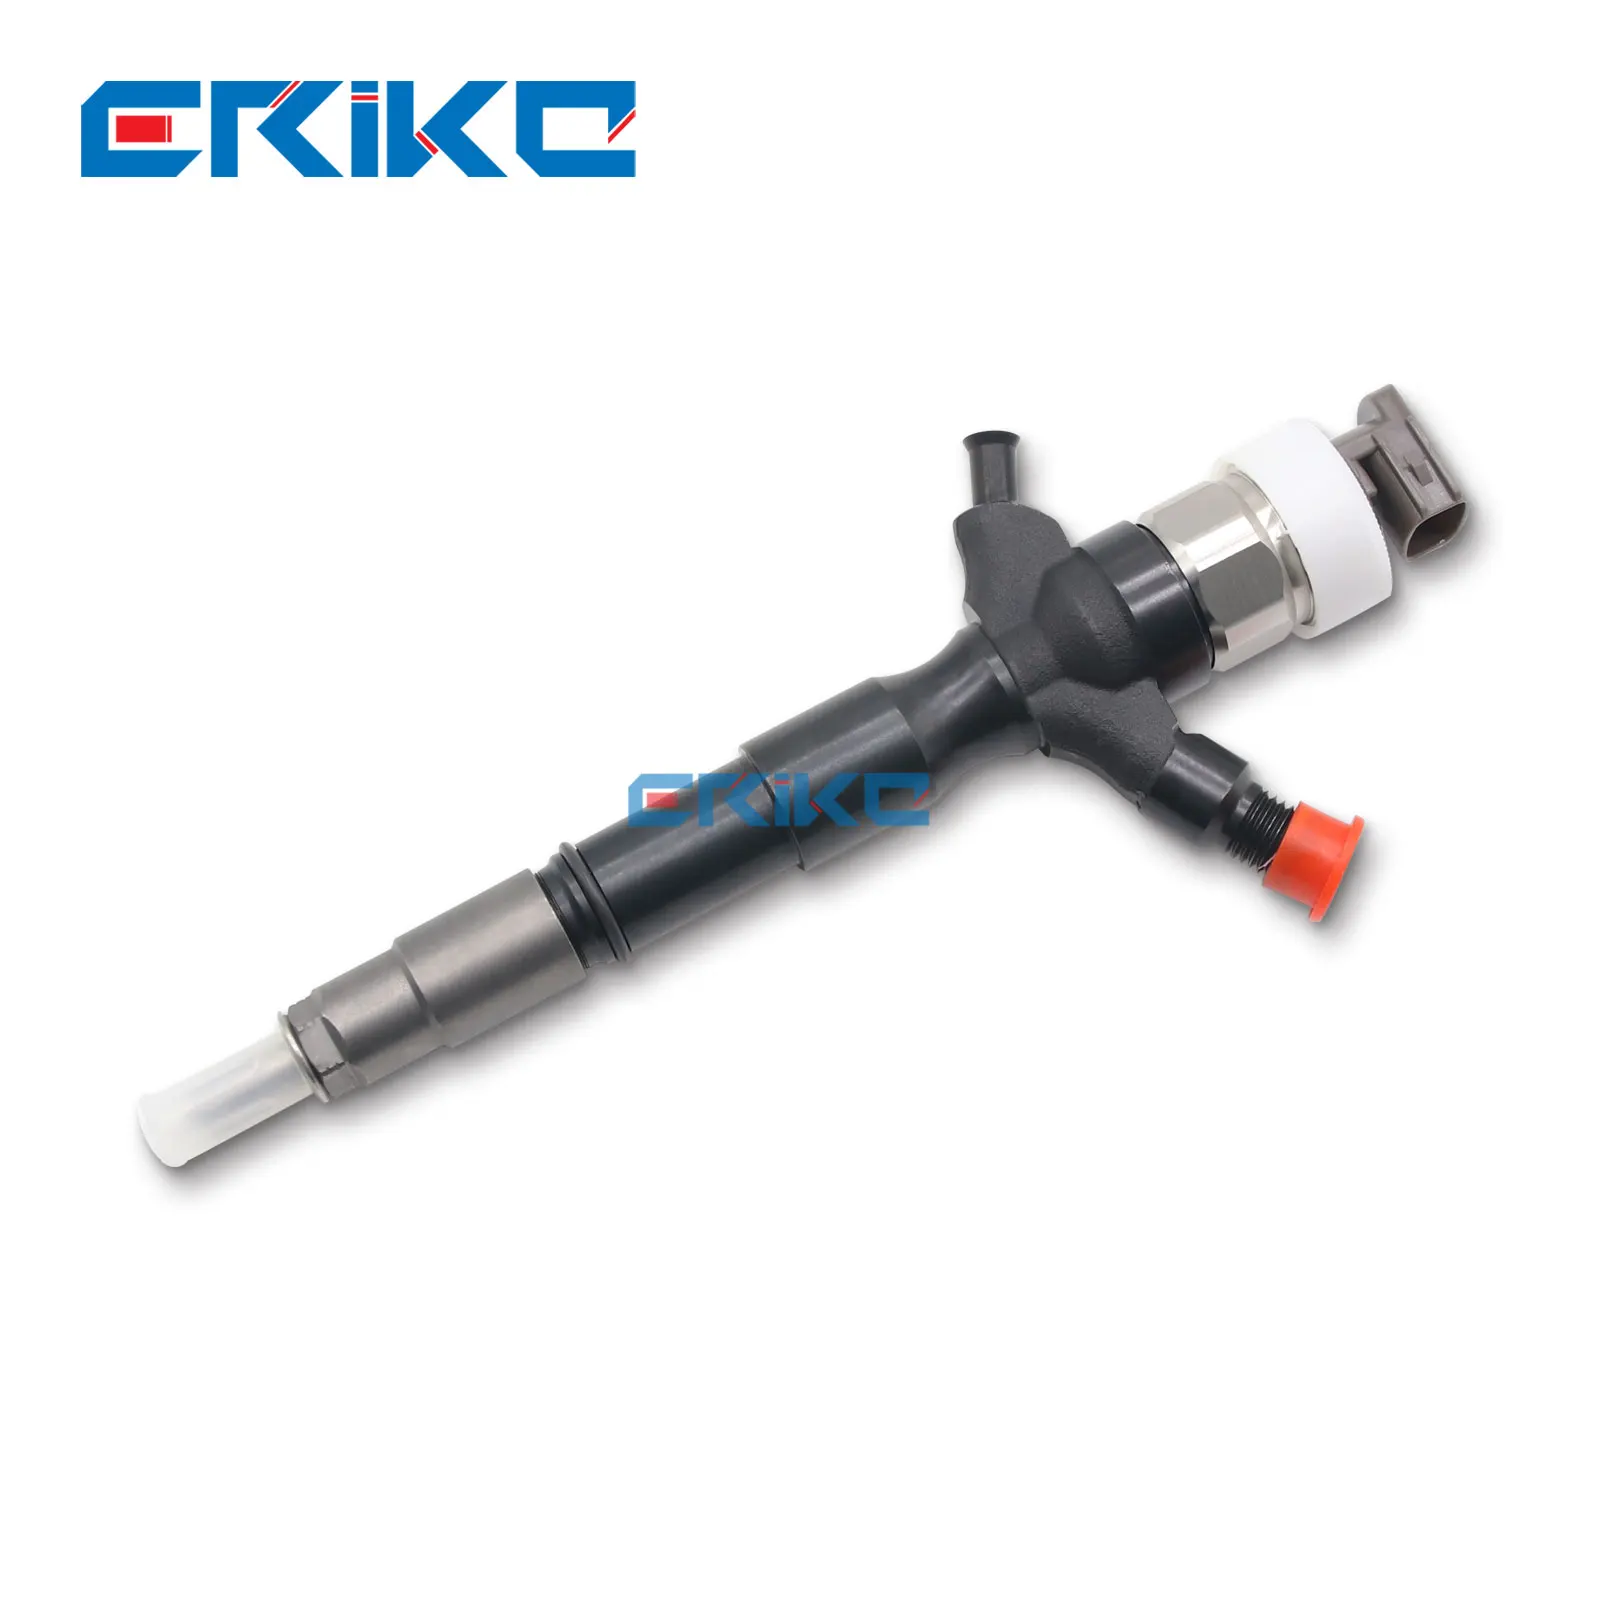 

095000-7390 Diesel Injector 295040-7480 Auto Fuel Complete Injector Nozzle 295040-7490 for Toyota Hilux 2.5 D 8-97602-485-5